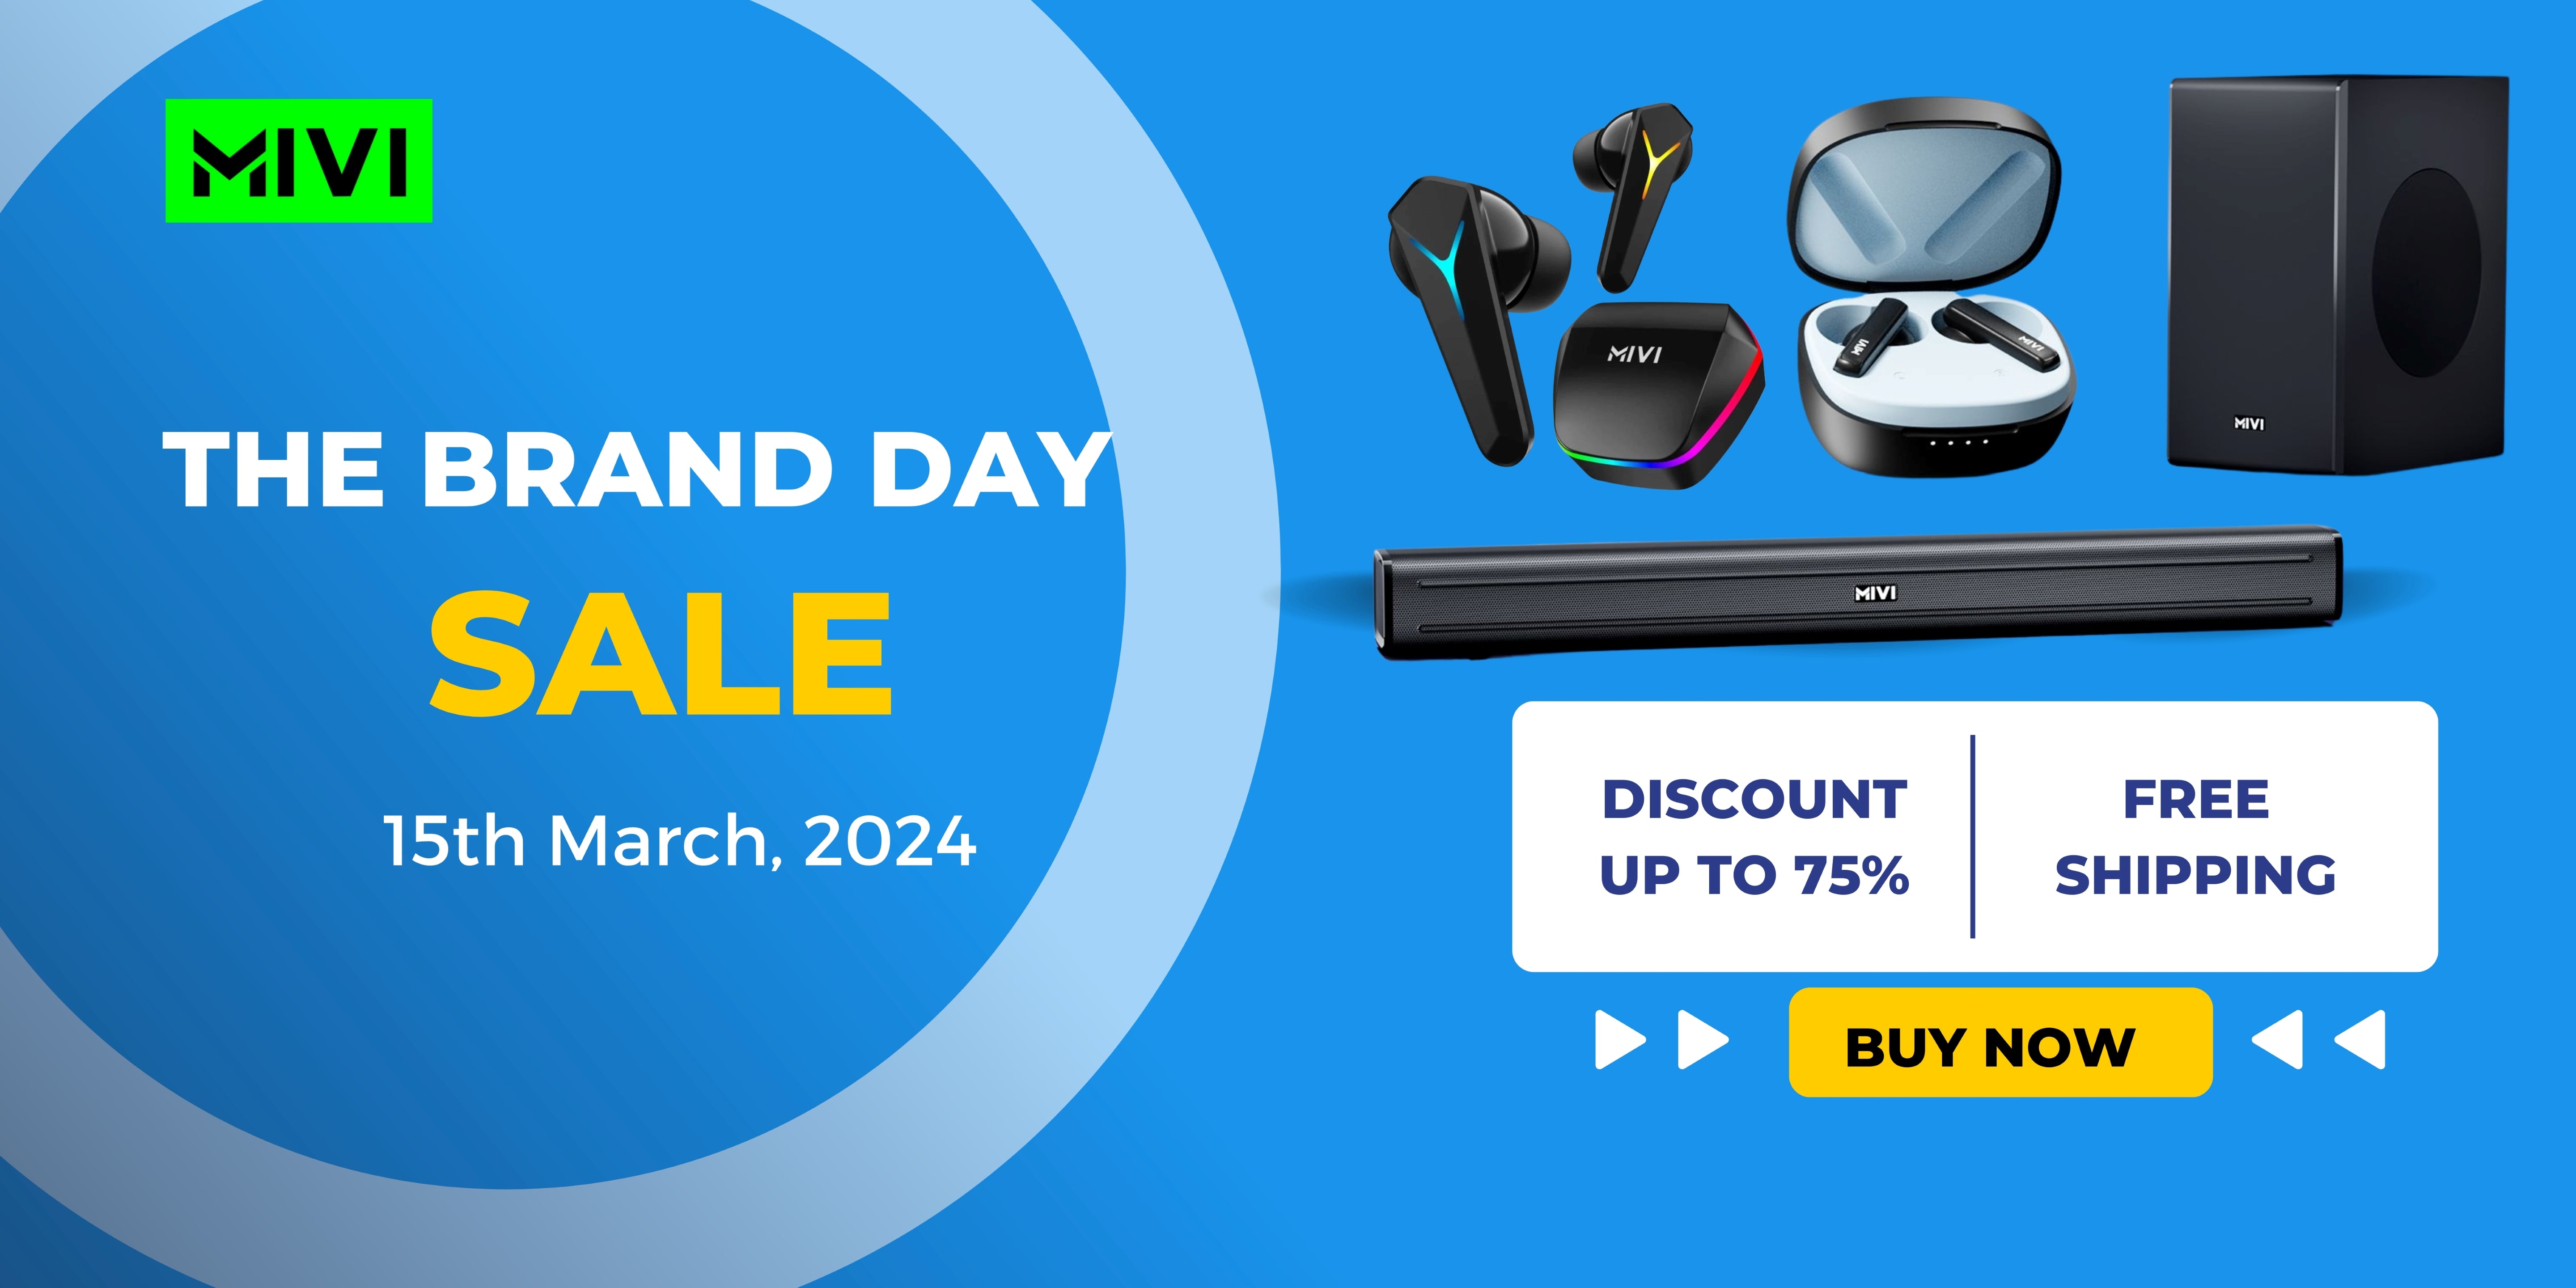 MIVI brand day sale in Nepal